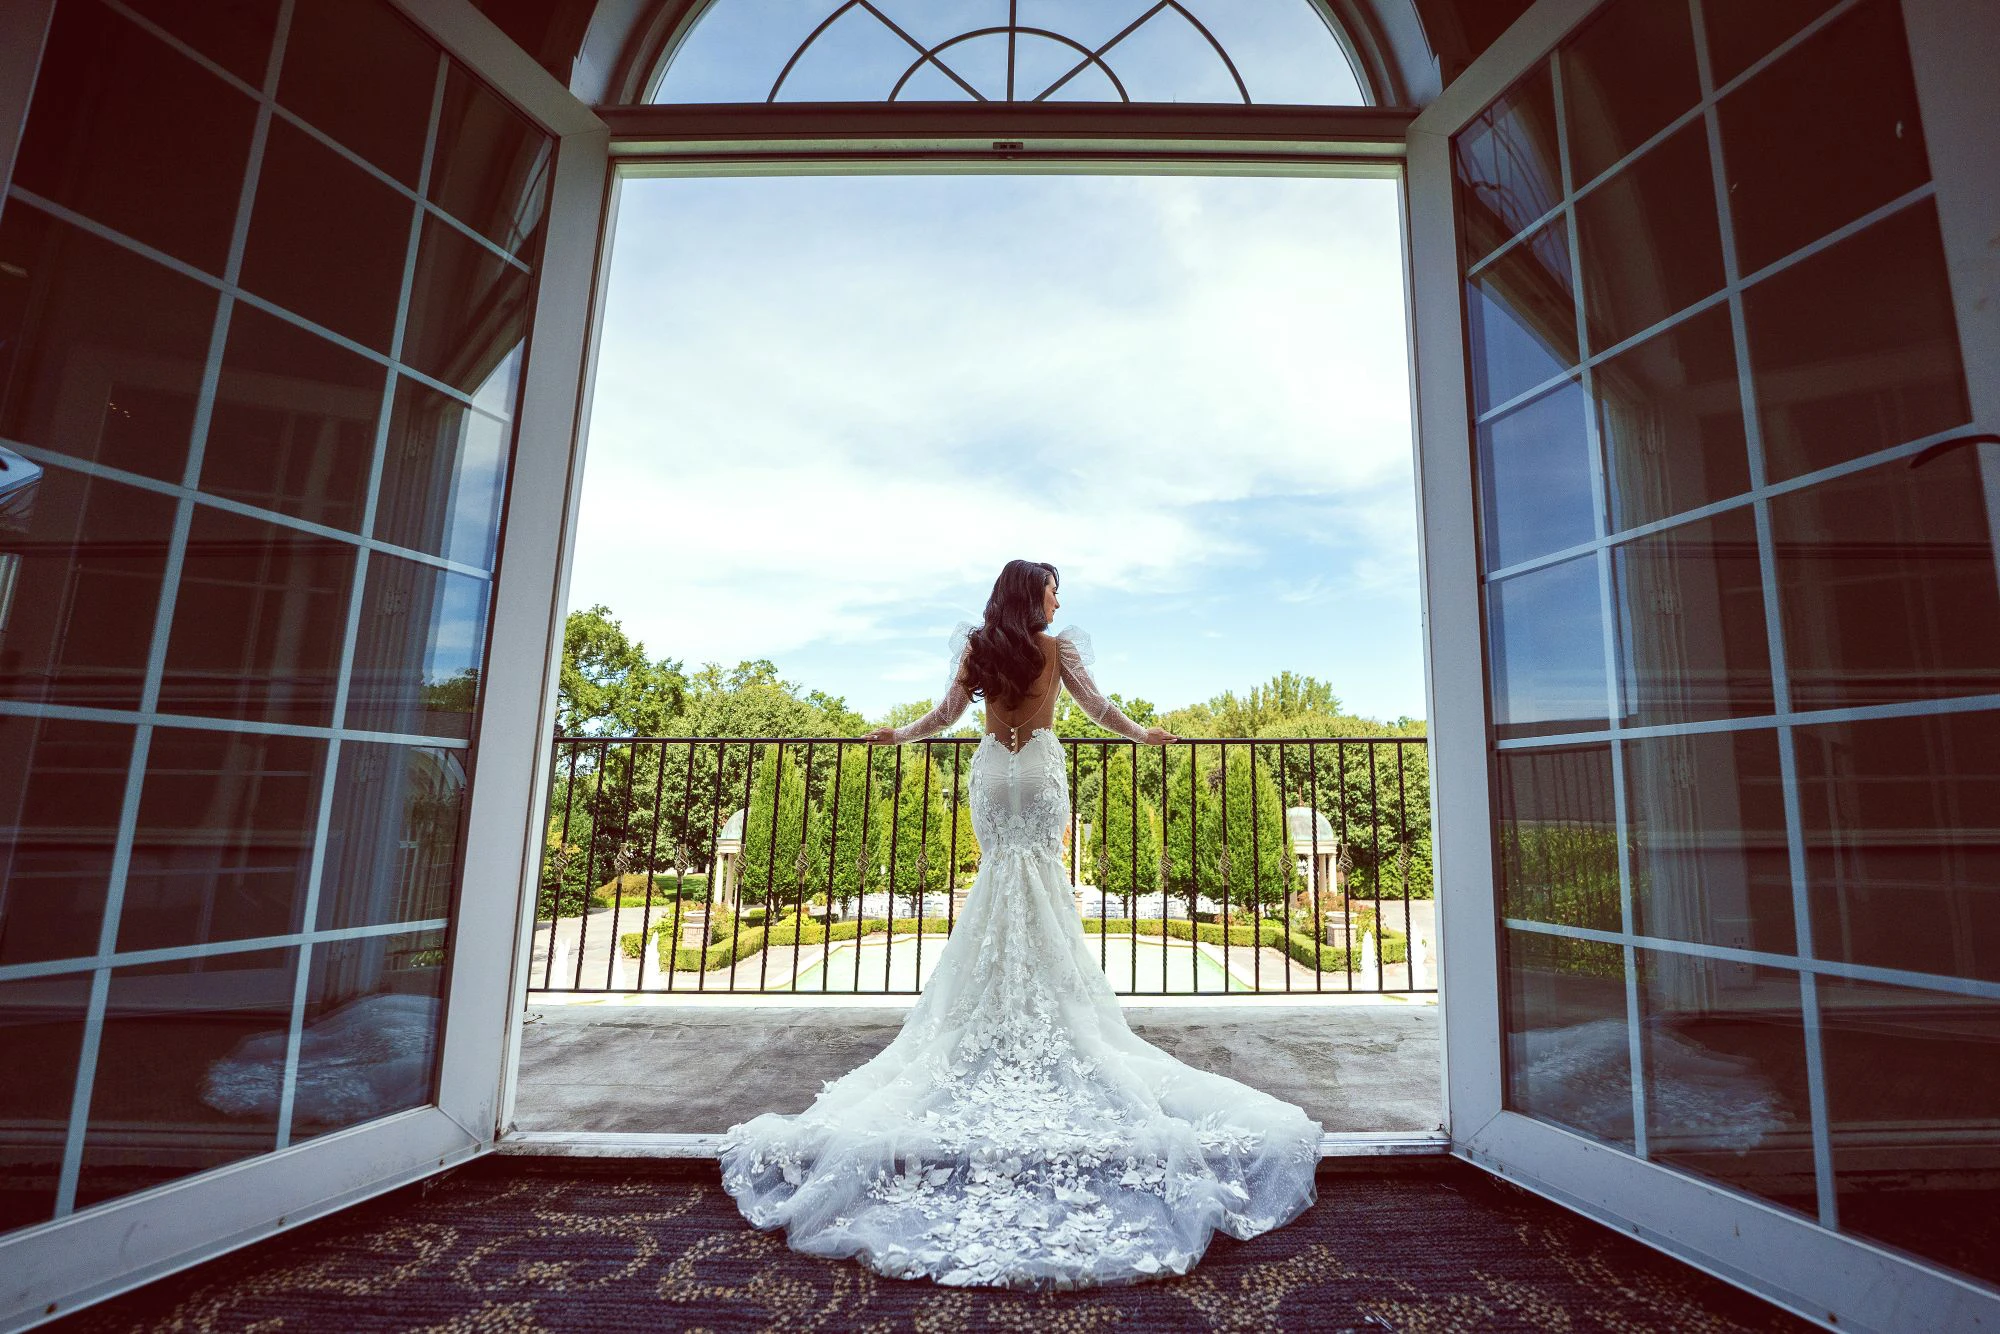 Wedding photography portrait of bride looking out over wedding venue from Juliet Balcony